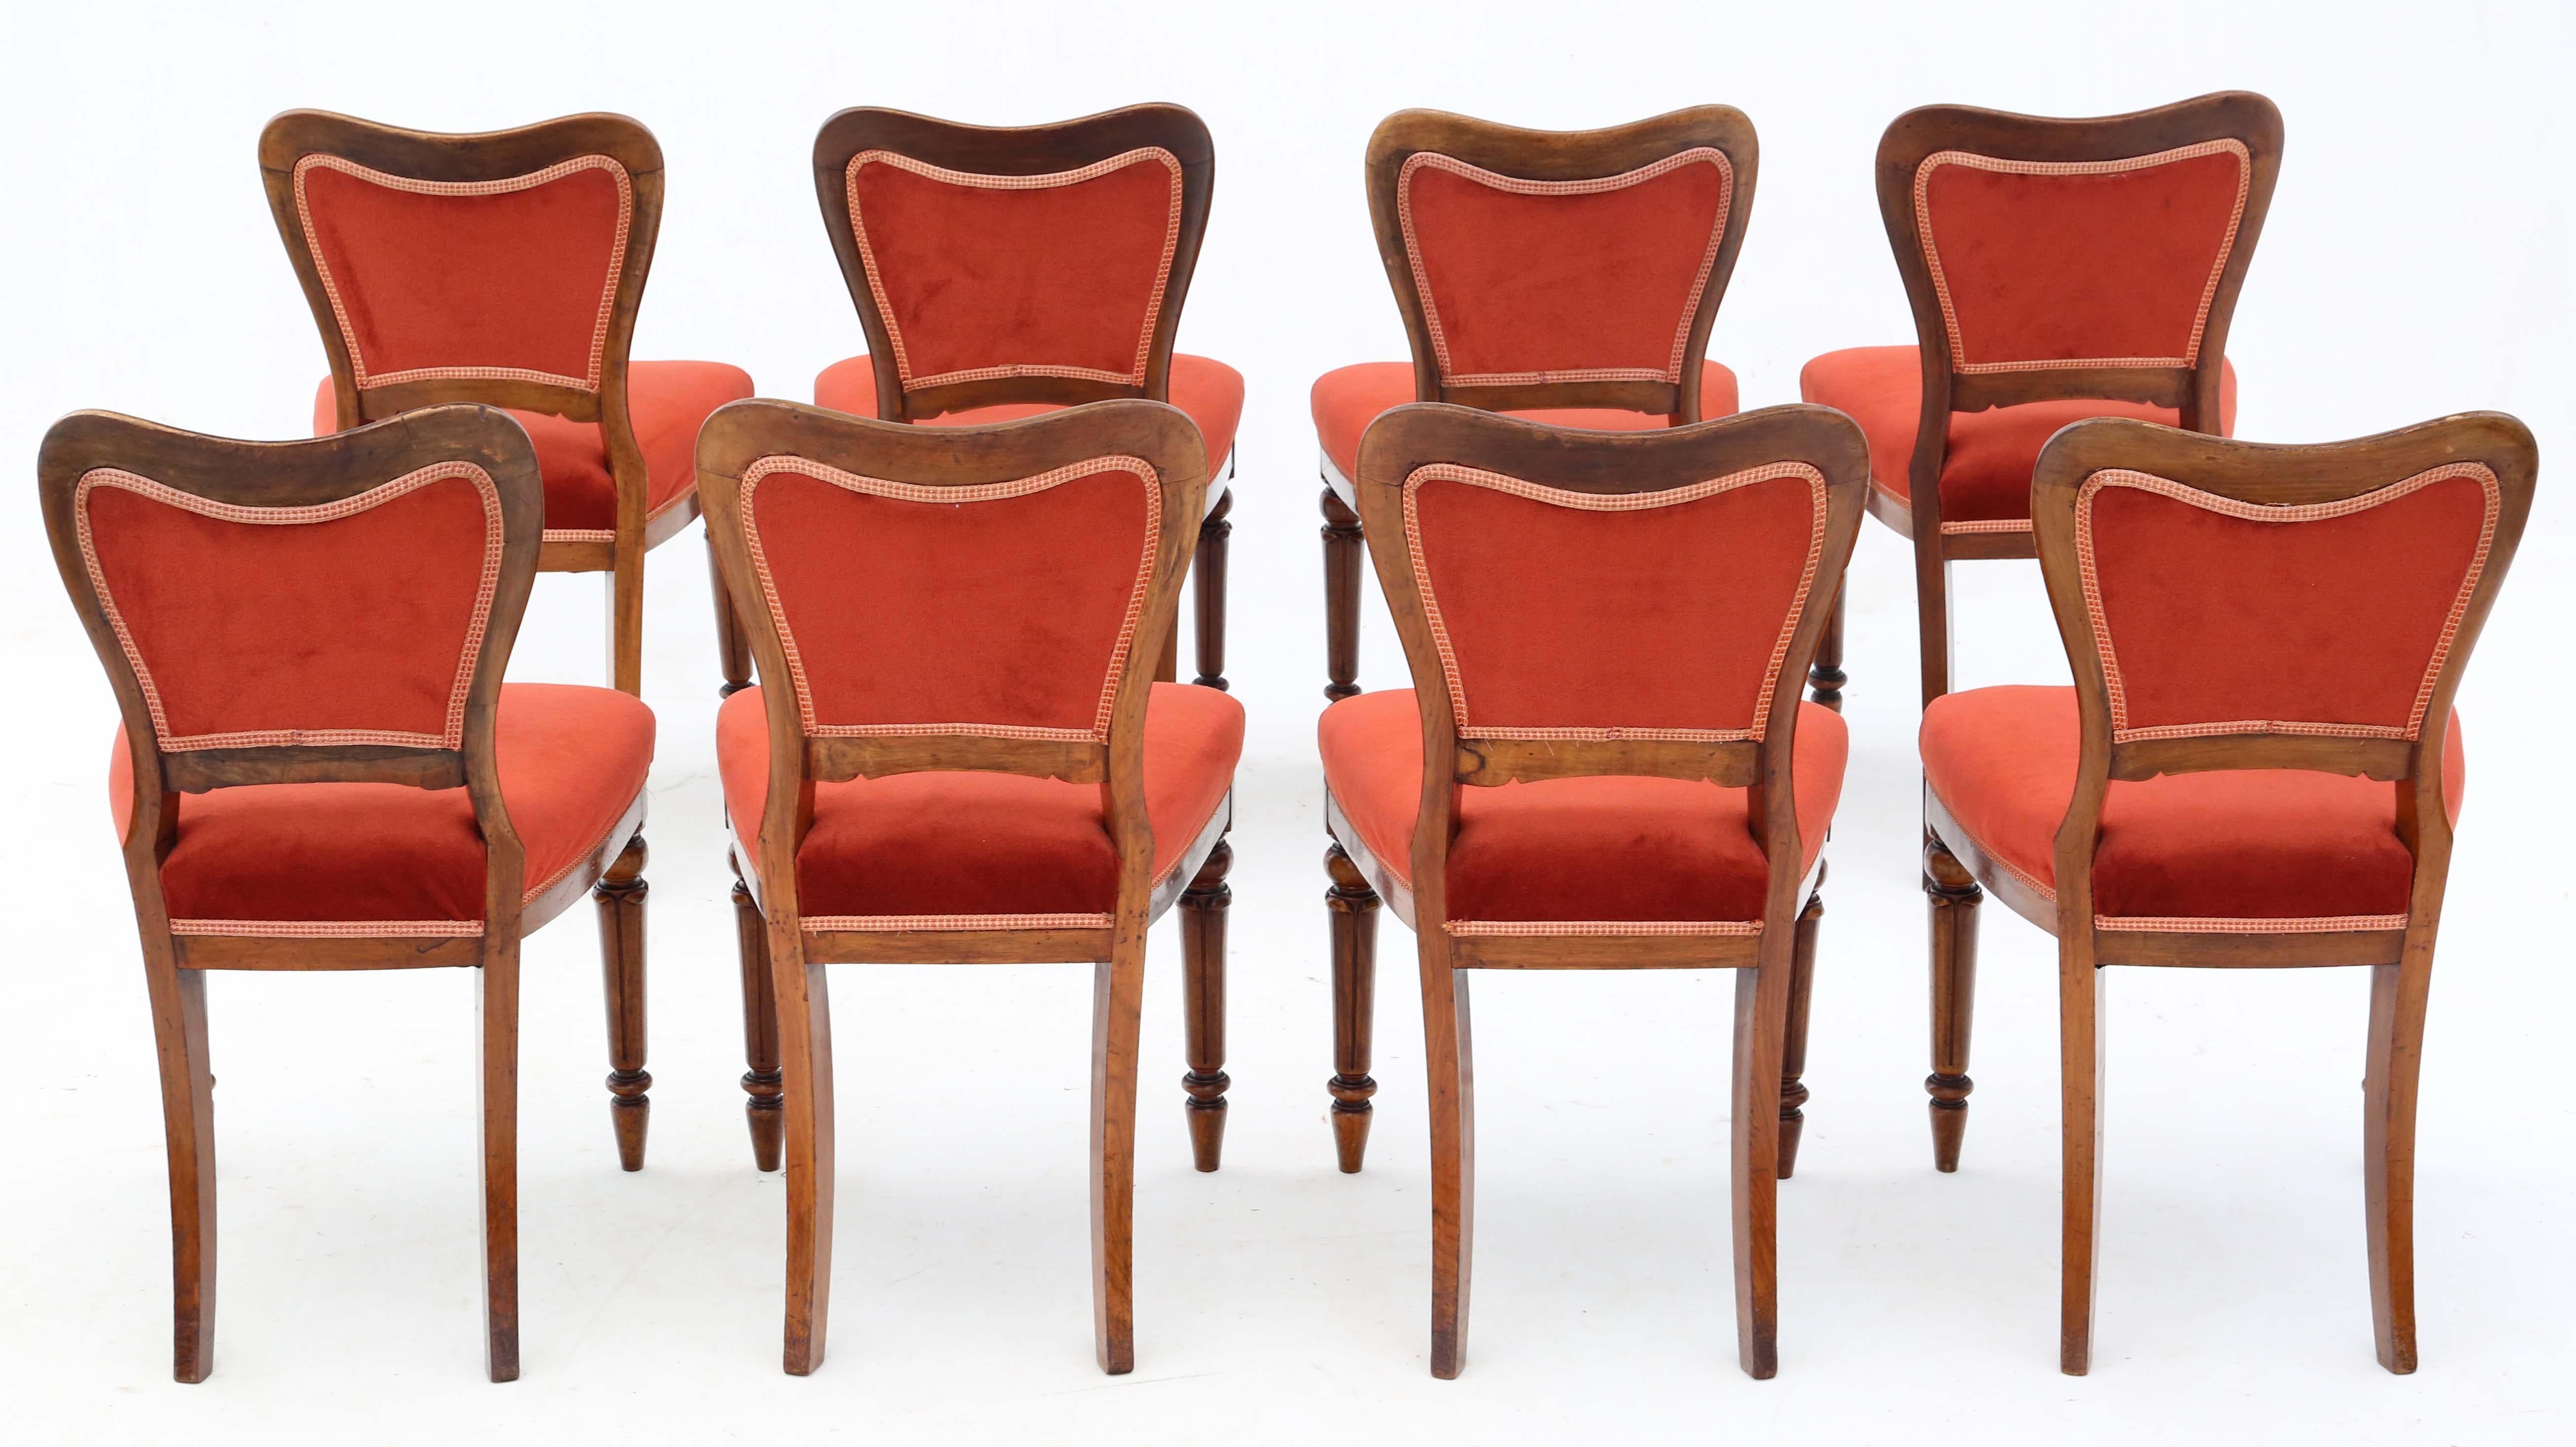 Victorian Walnut Dining Chairs: Set of 8, Antique Quality, 19th Century In Good Condition In Wisbech, Cambridgeshire